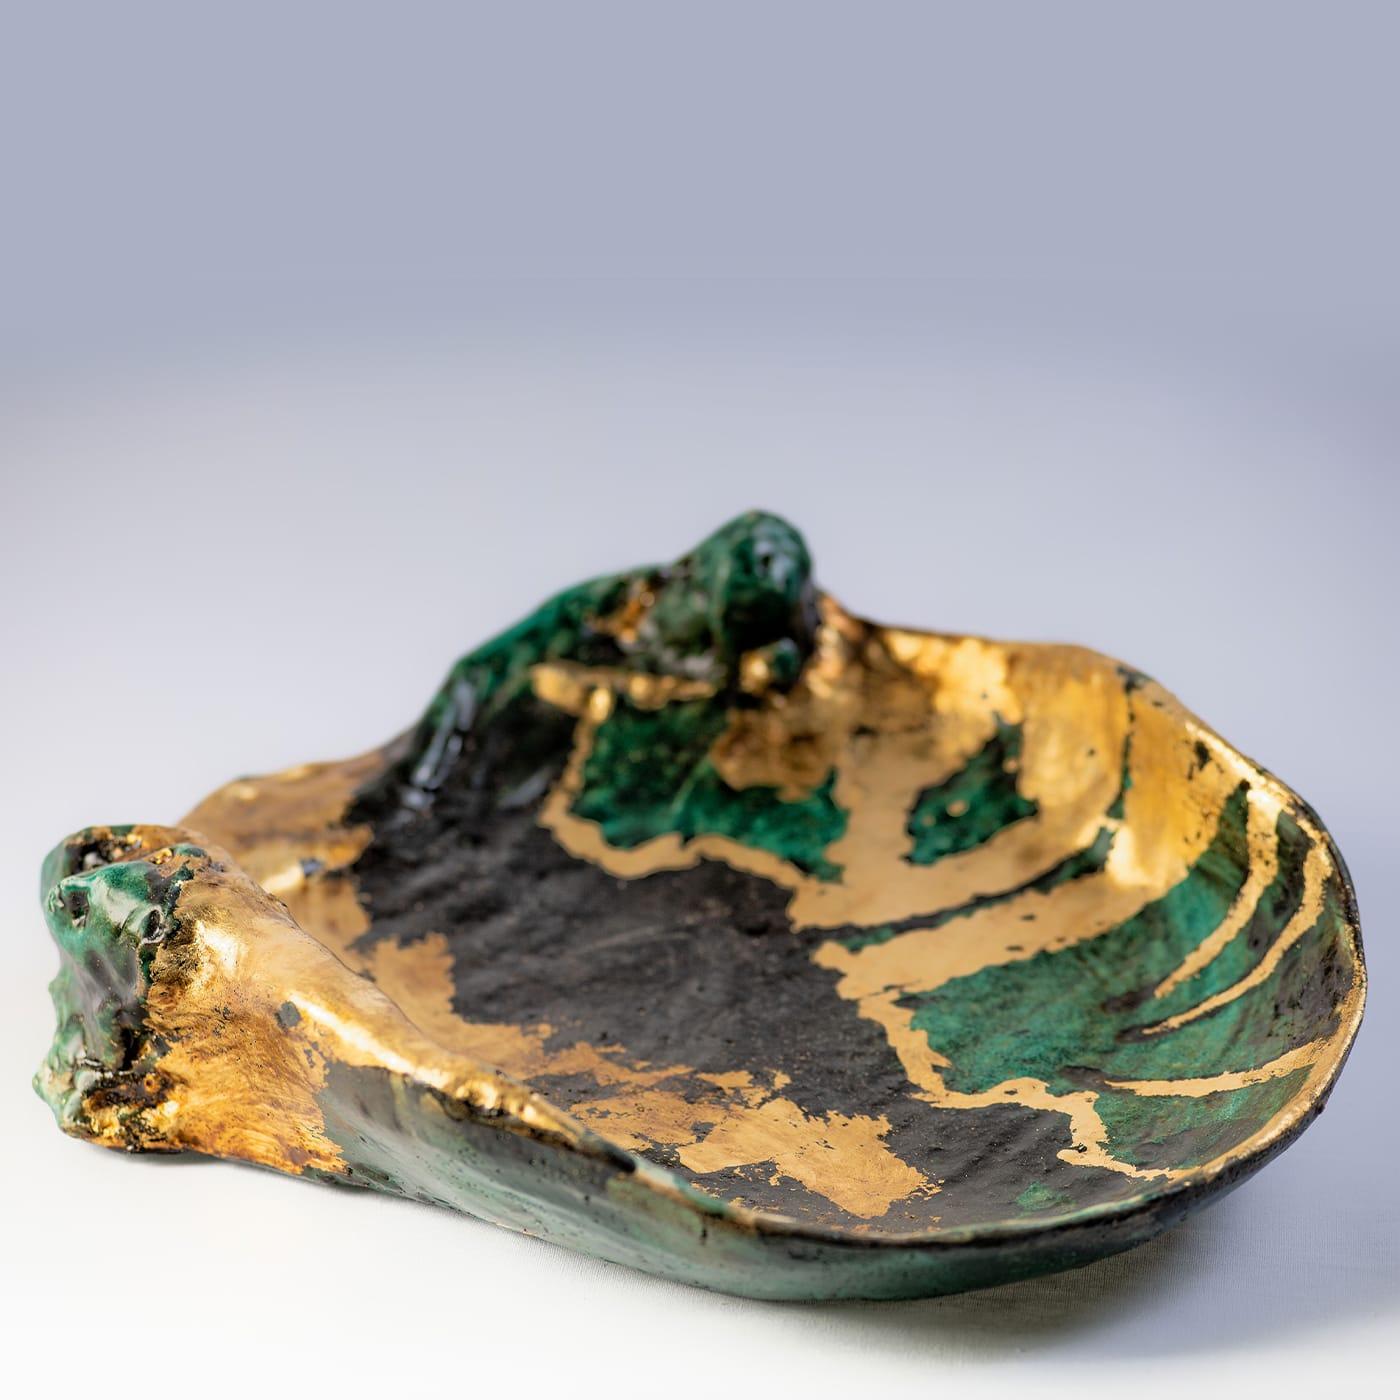 Playing with the interaction of verdigris and black glazes veined with lavish accents of gold leaf, artist Angelo Salemi handcrafted this sublime ceramic centerpiece bowl. Two human faces seem to emerge from the sides, giving this deliberately